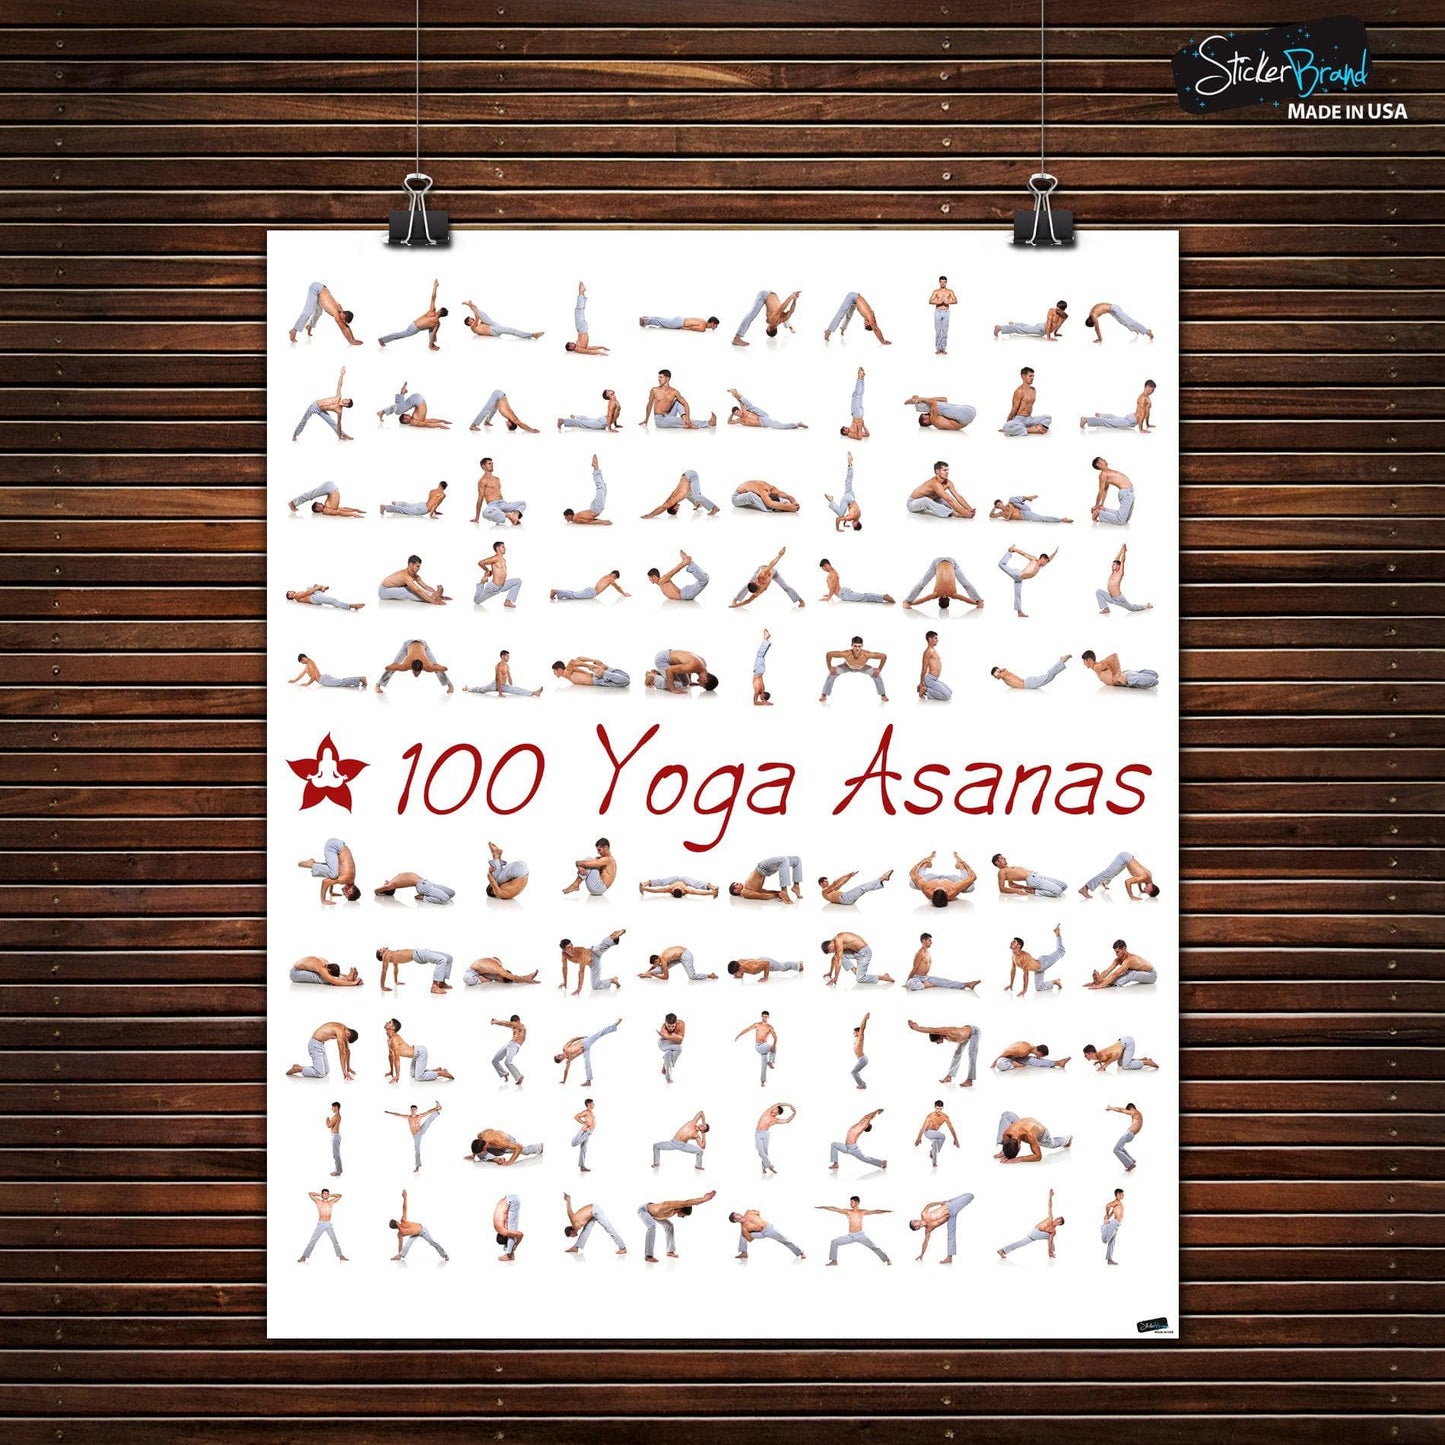 100 Yoga Poses Asanas Poster. Instructional Graphic Poster for Yoga Studio or Home. #6109